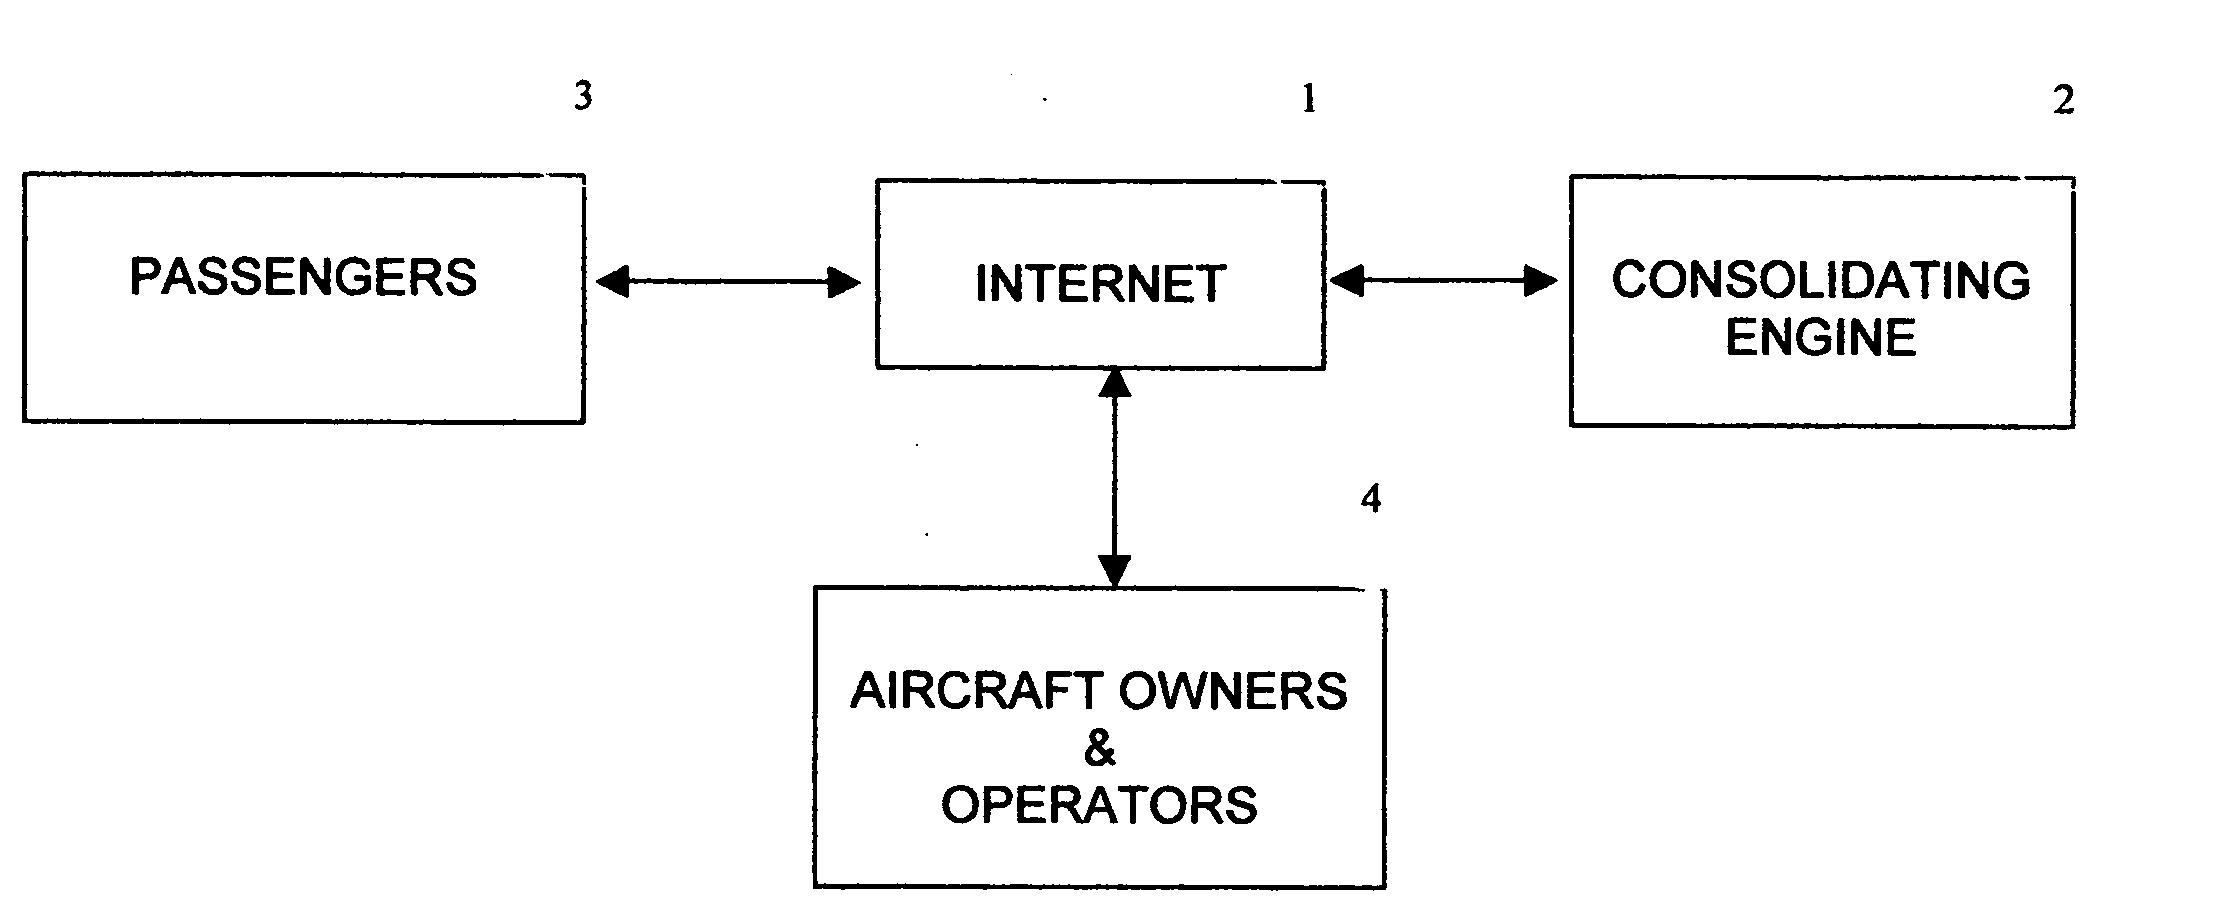 Consolidating engine for passengers of private aircraft